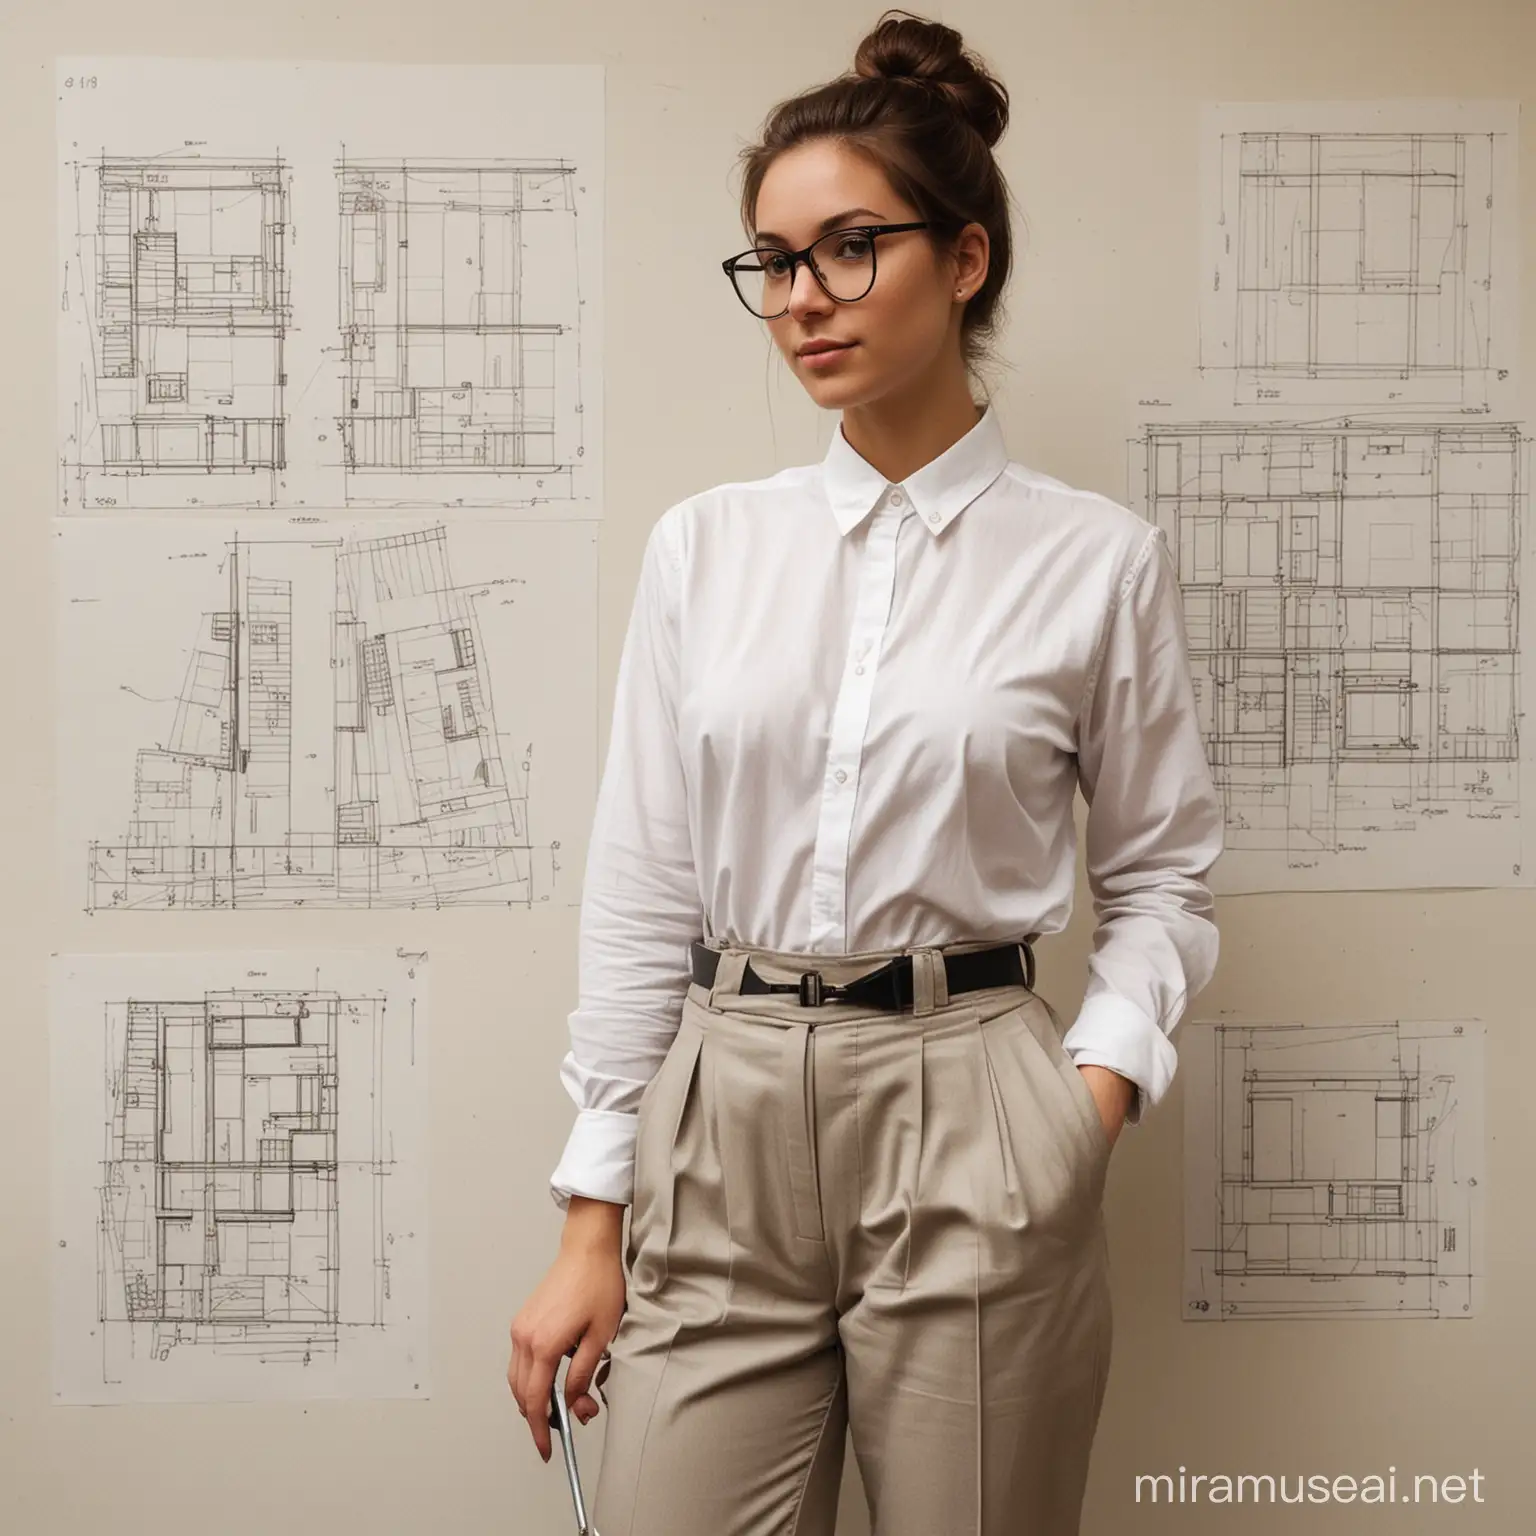 Determined Architecture Student with Stylish Tools and Portfolio